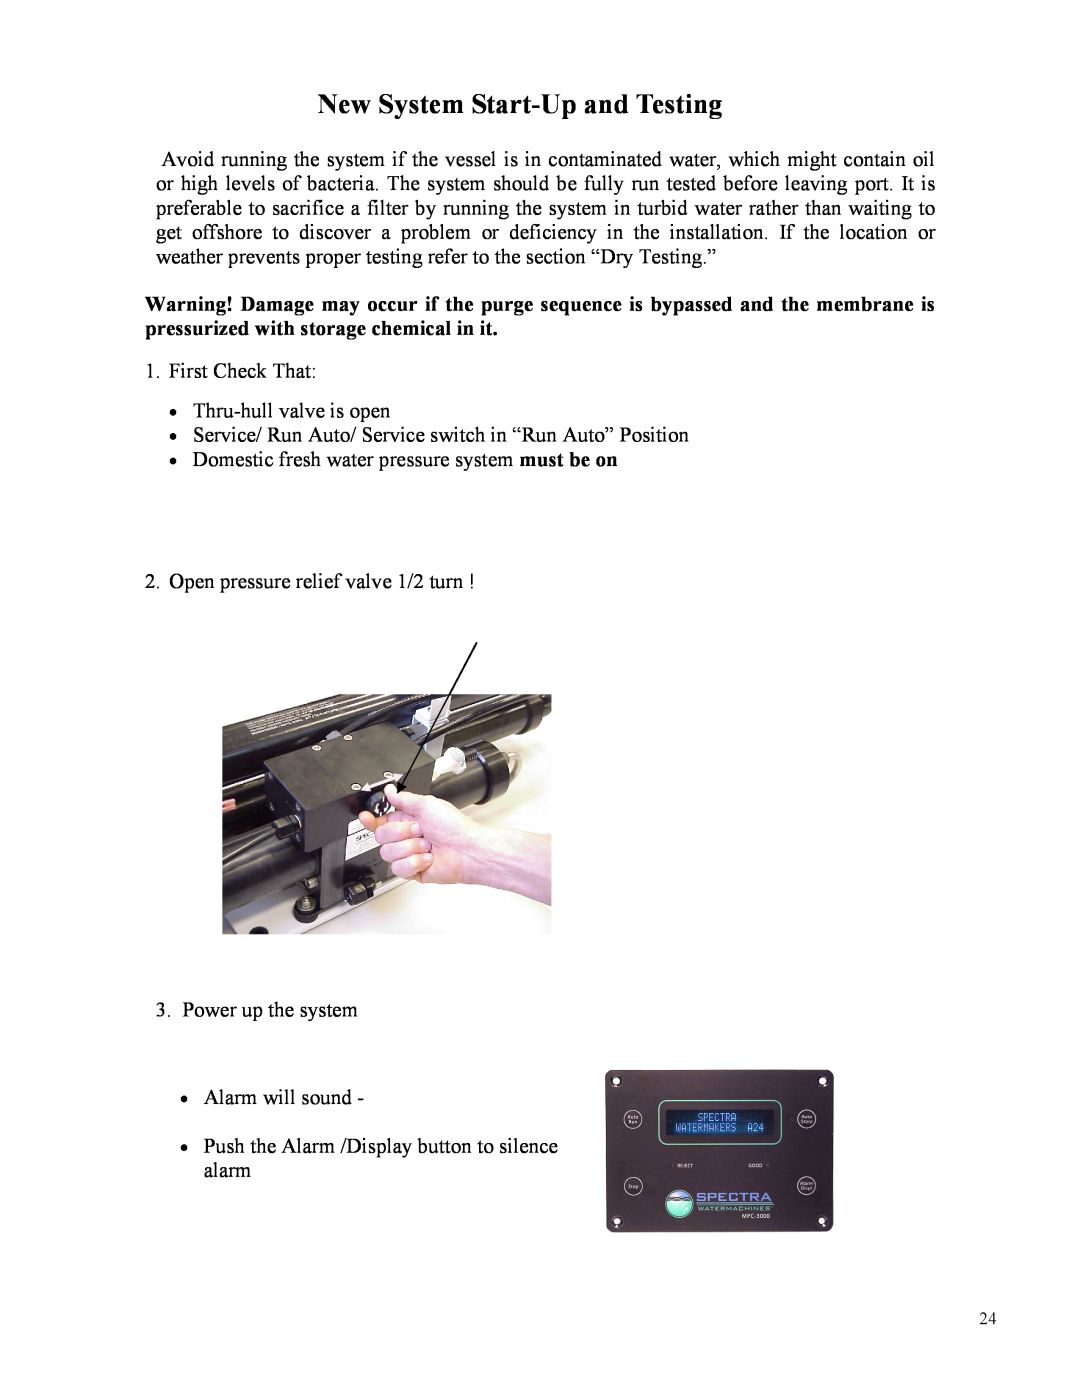 Spectra Watermakers Newport 400 owner manual New System Start-Upand Testing 